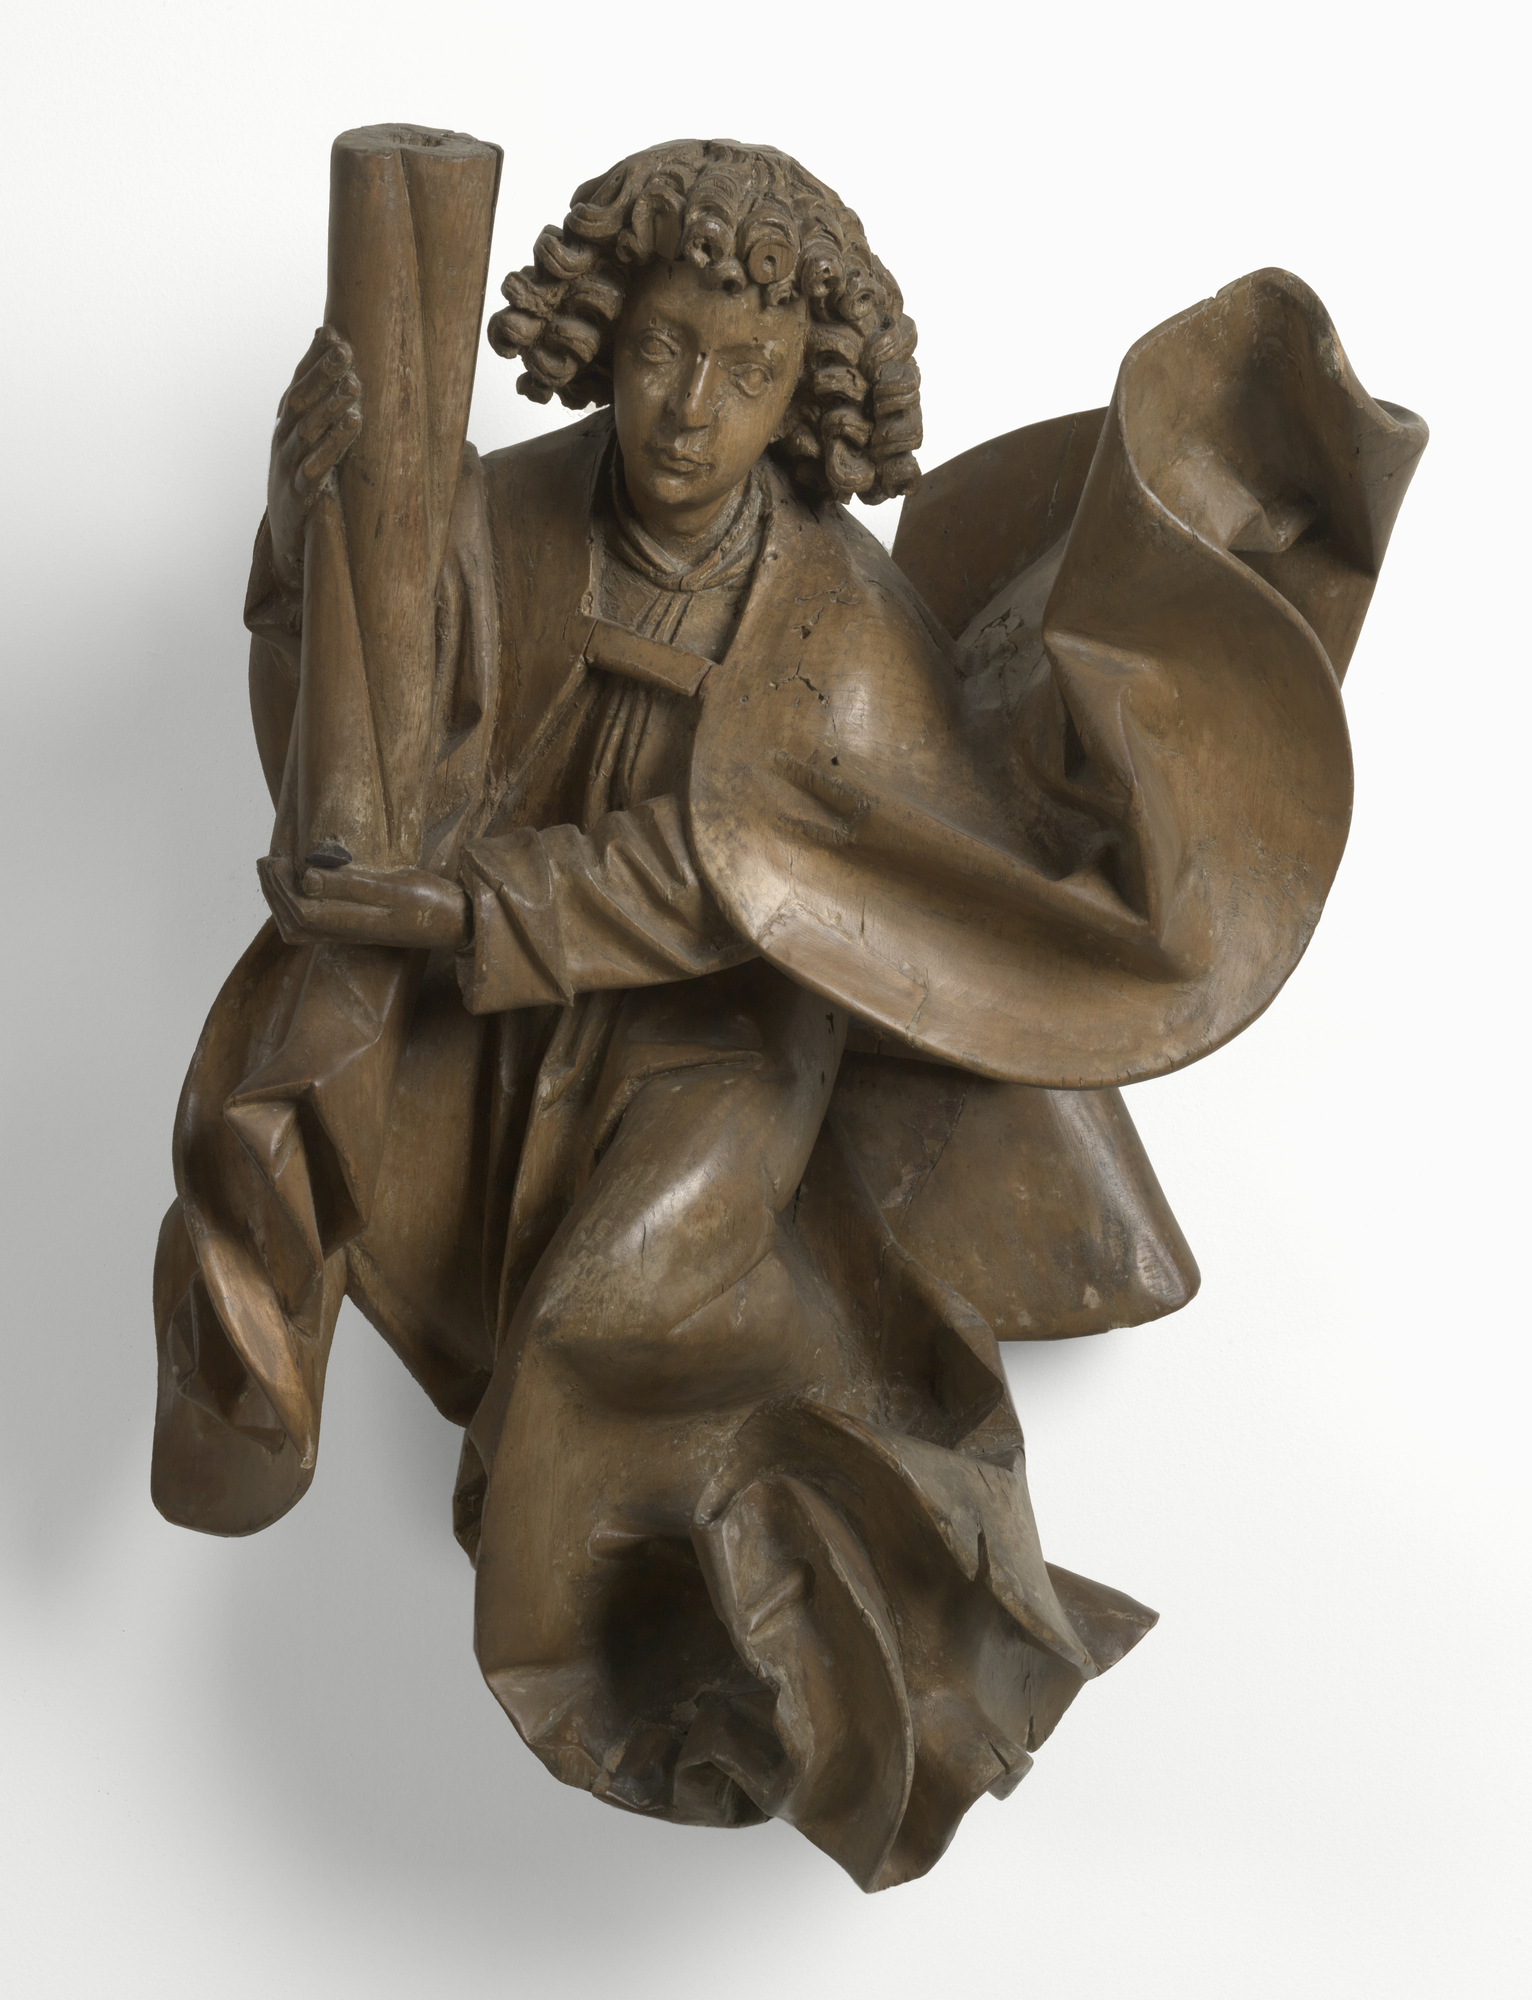 Carved wooden angel wearing loose robes, with short curly hair, holding onto a column